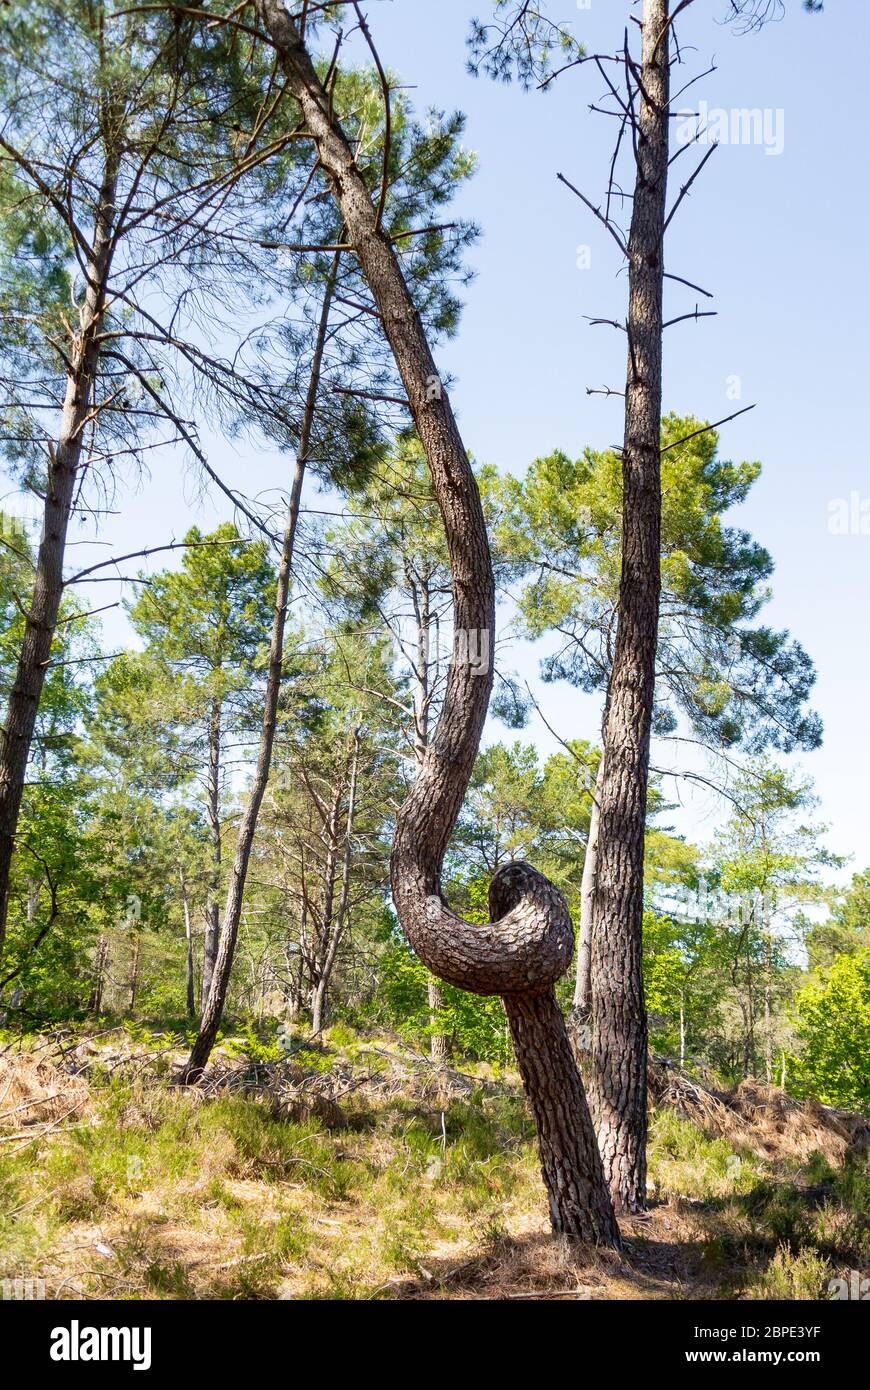 A tree with a twist in a forest Stock Photo